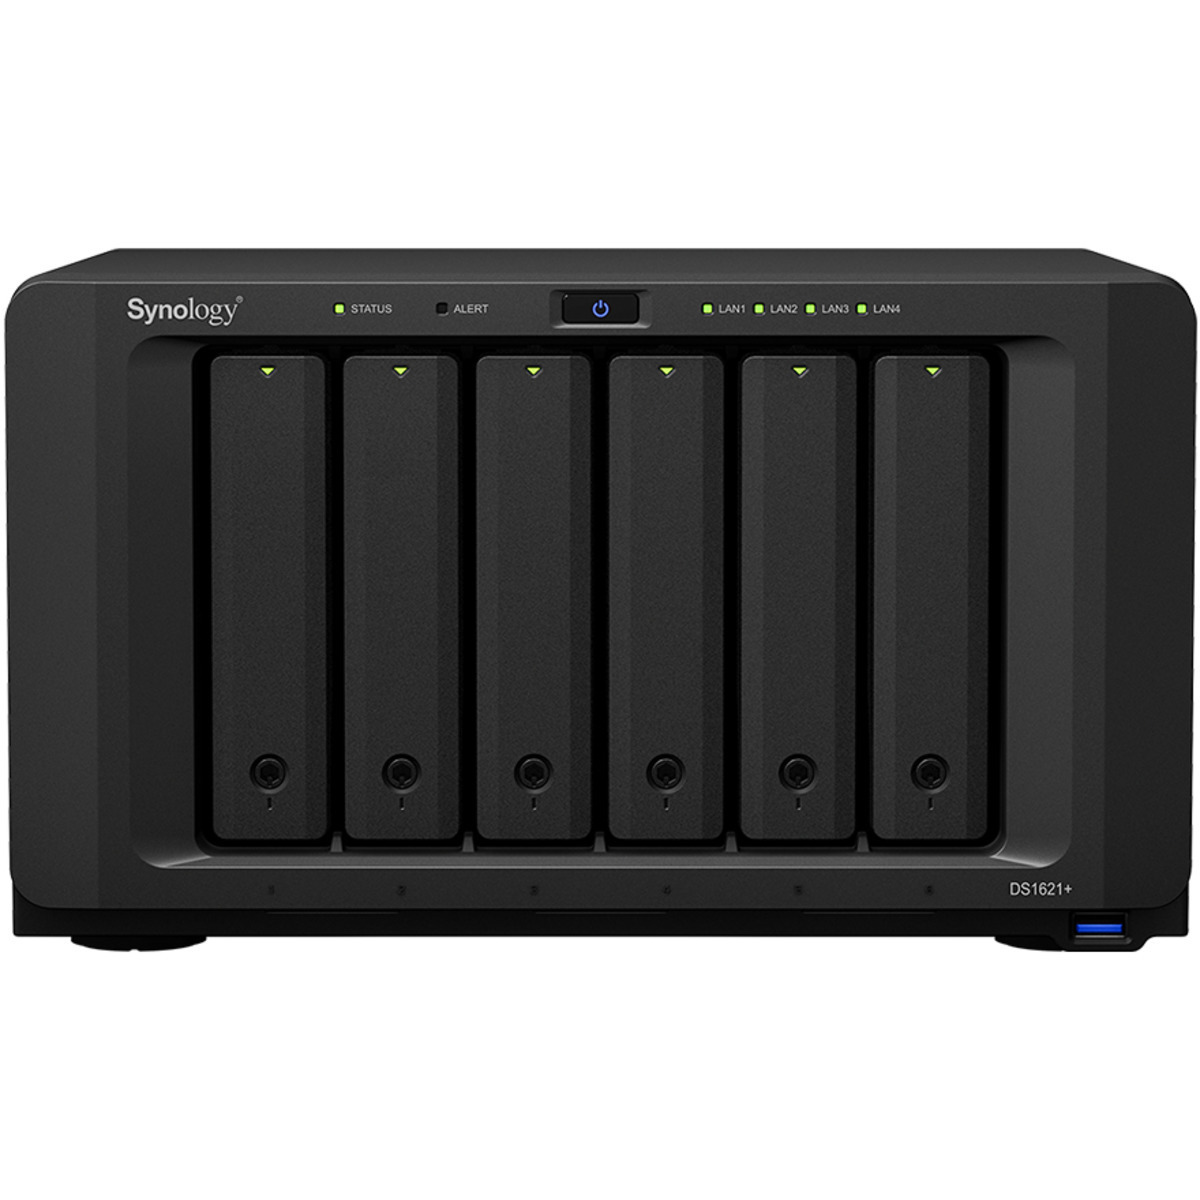 Synology DiskStation DS1621+ 20tb 6-Bay Desktop Multimedia / Power User / Business NAS - Network Attached Storage Device 5x4tb Synology Plus Series HAT3300-4T 3.5 5400rmp SATA 6Gb/s HDD NAS Class Drives Installed - Burn-In Tested - FREE RAM UPGRADE DiskStation DS1621+